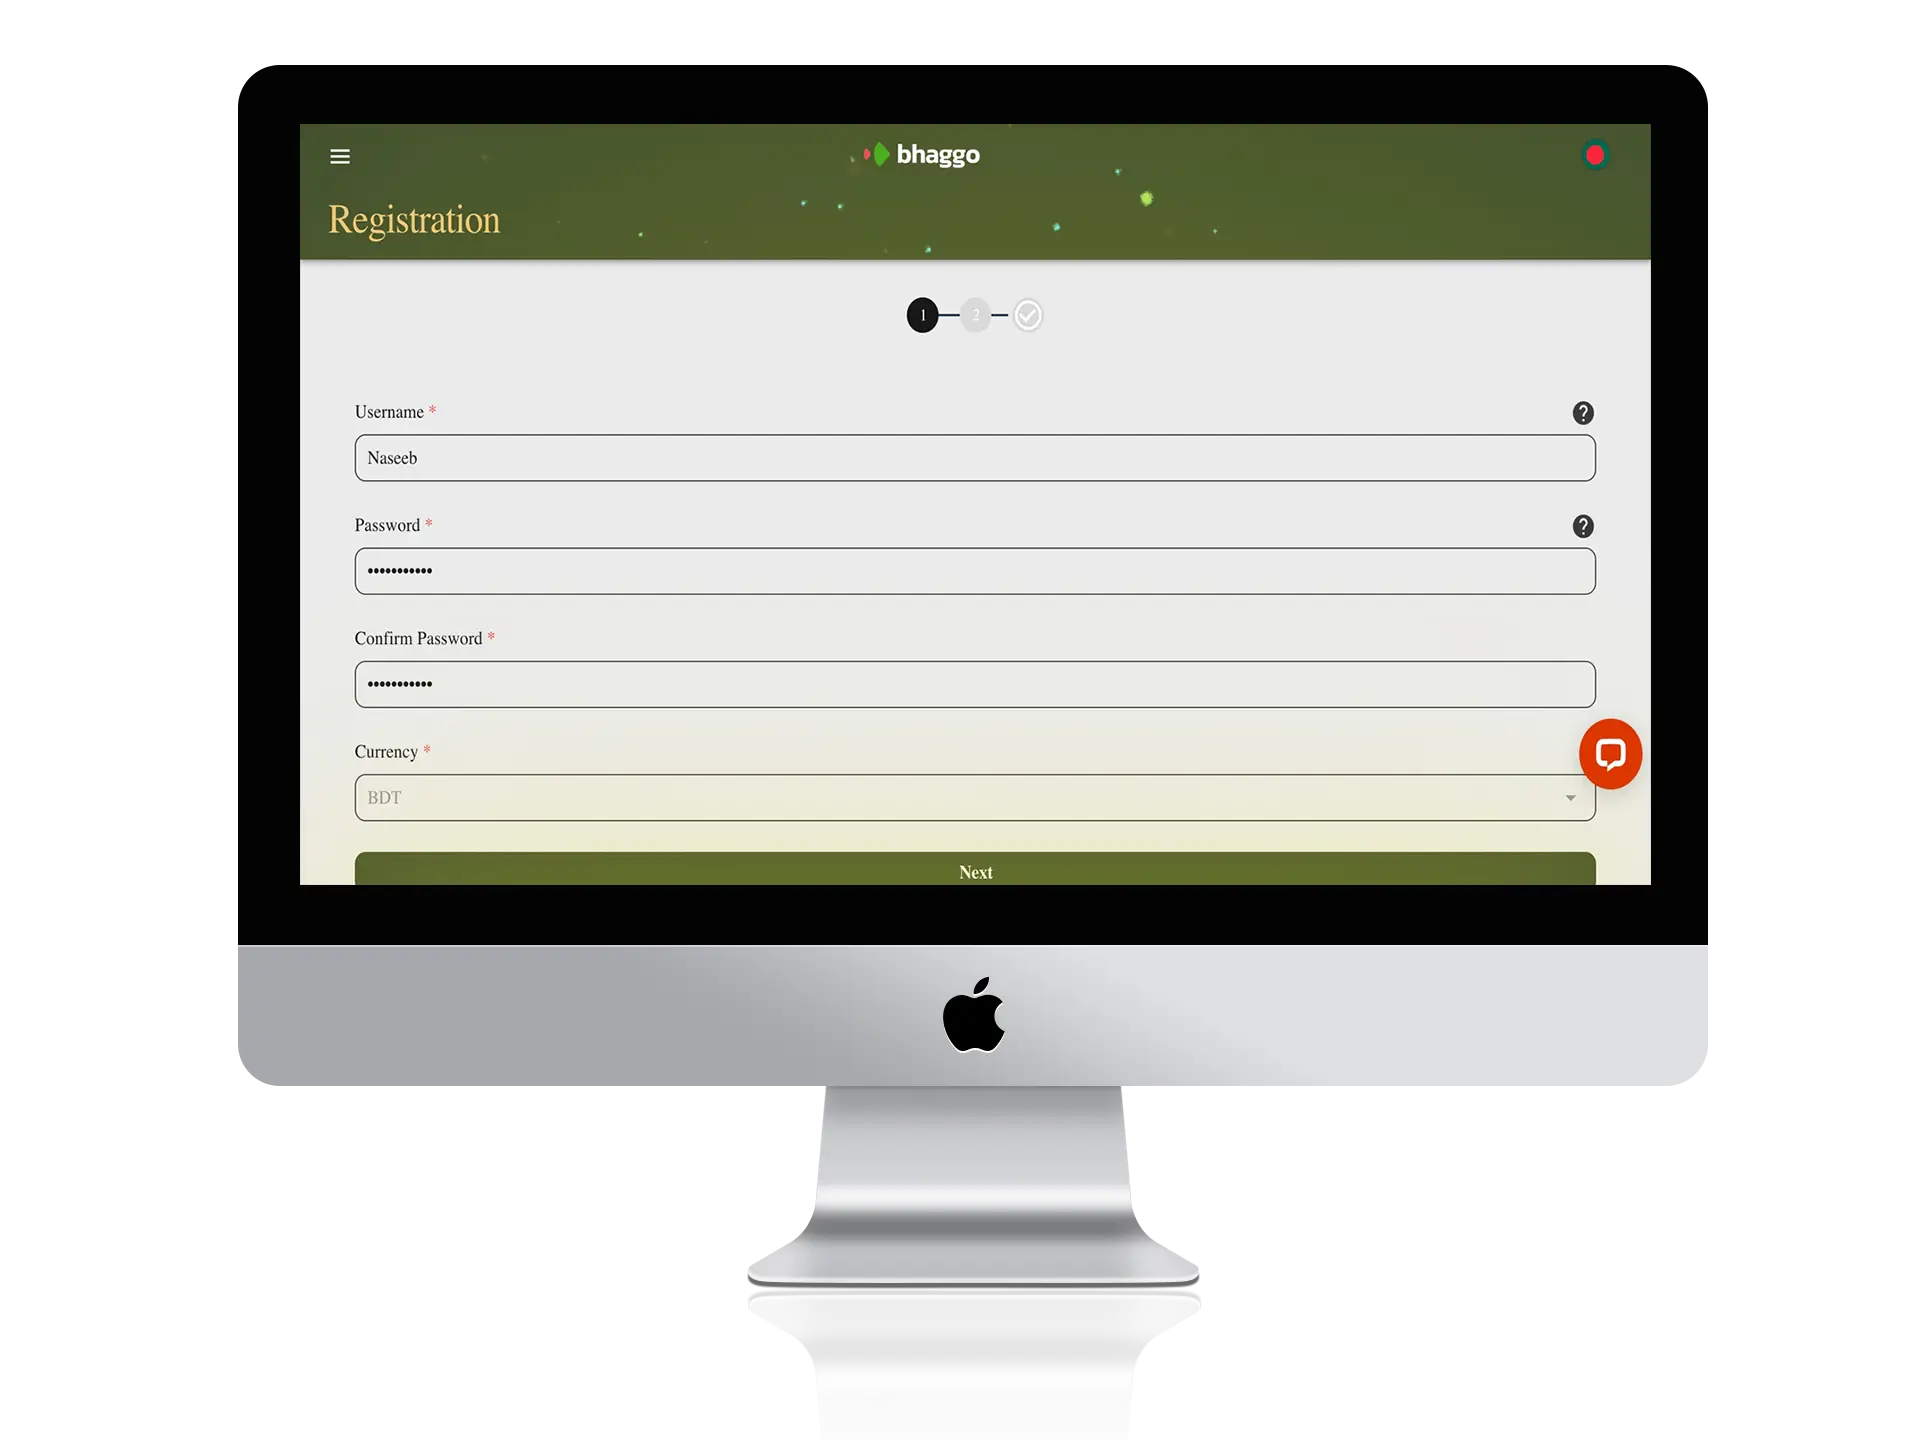 Enter your up-to-date information in the fields so that you can authorise yourself further on the Bhaggo platform.